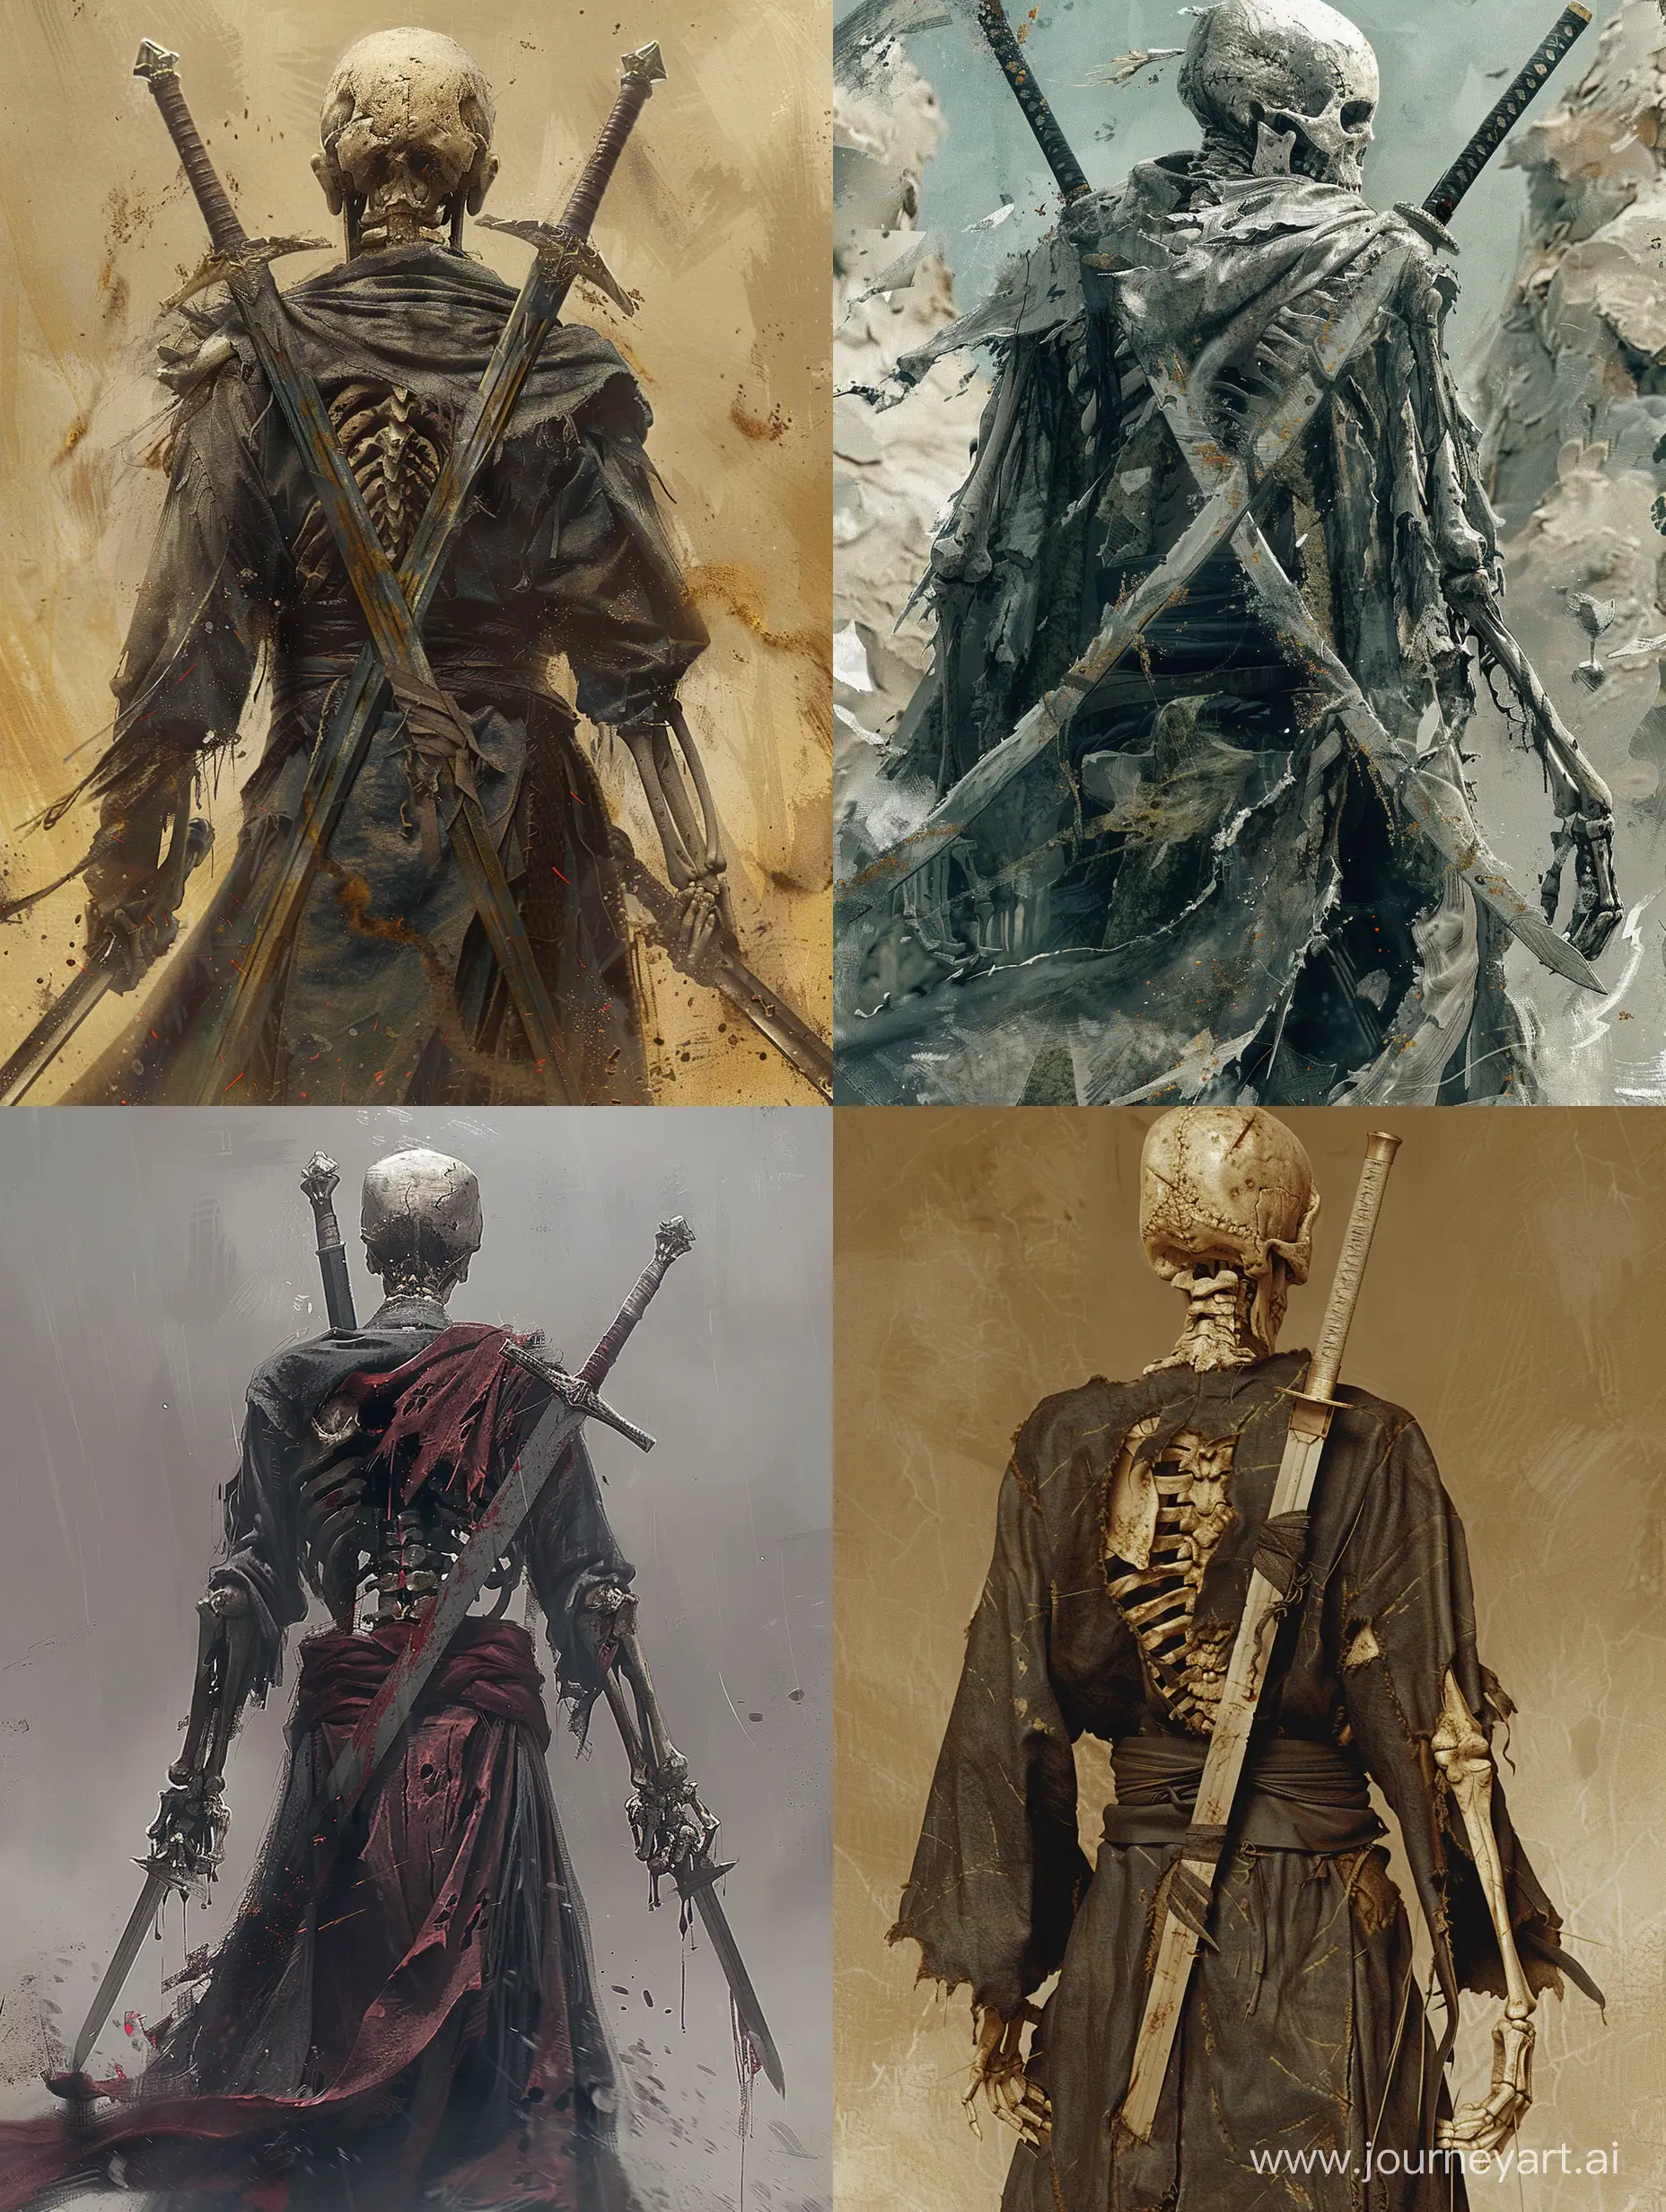 Skeleton warrior with torn robe,two swords in the back,incredible detail,terrifying,Digital Art,Imaginary image,fantasy.